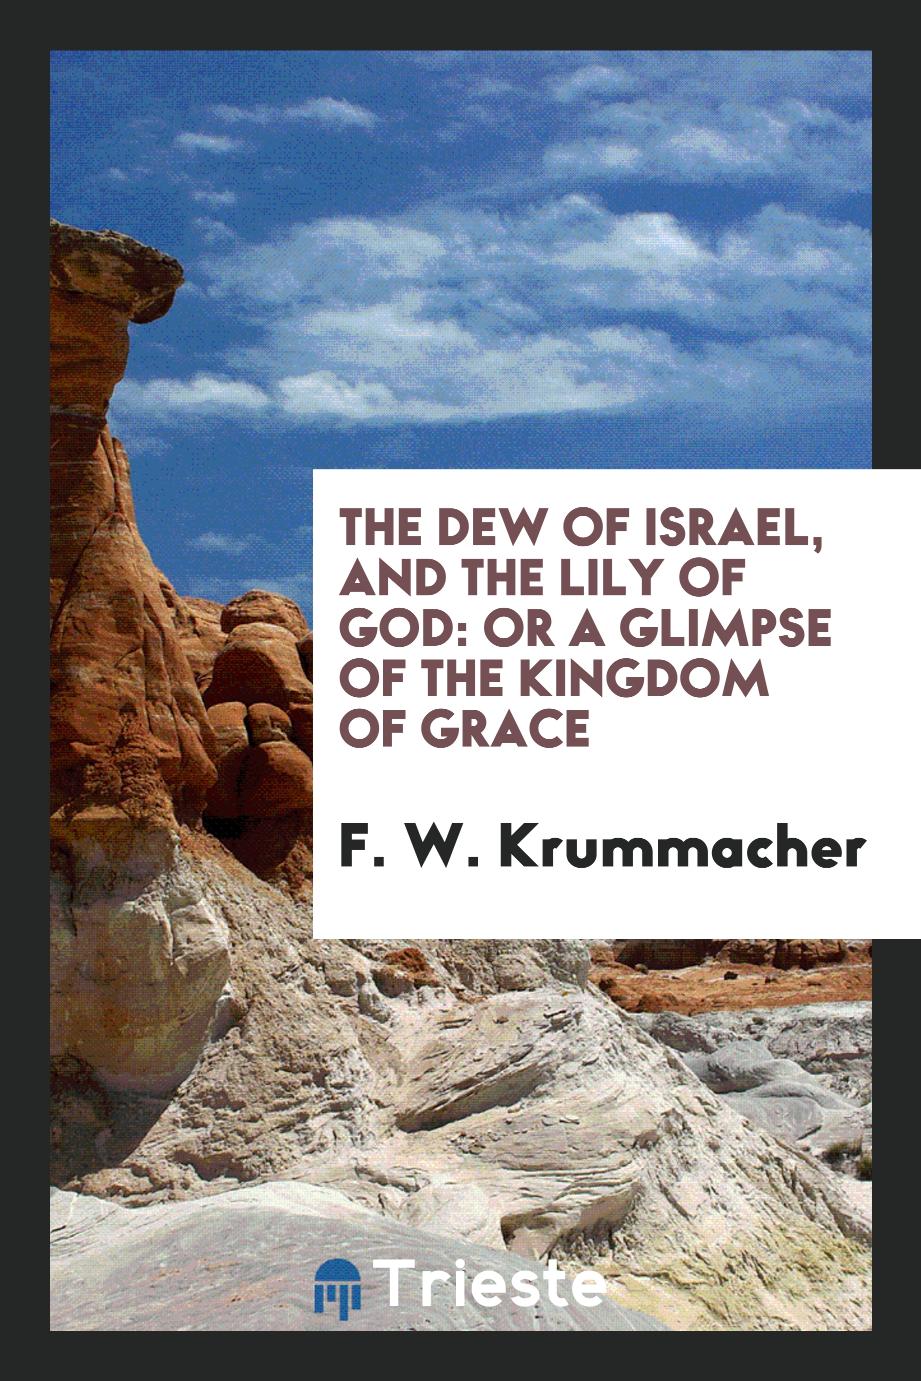 The dew of Israel, and the lily of God: or a Glimpse of the Kingdom of grace